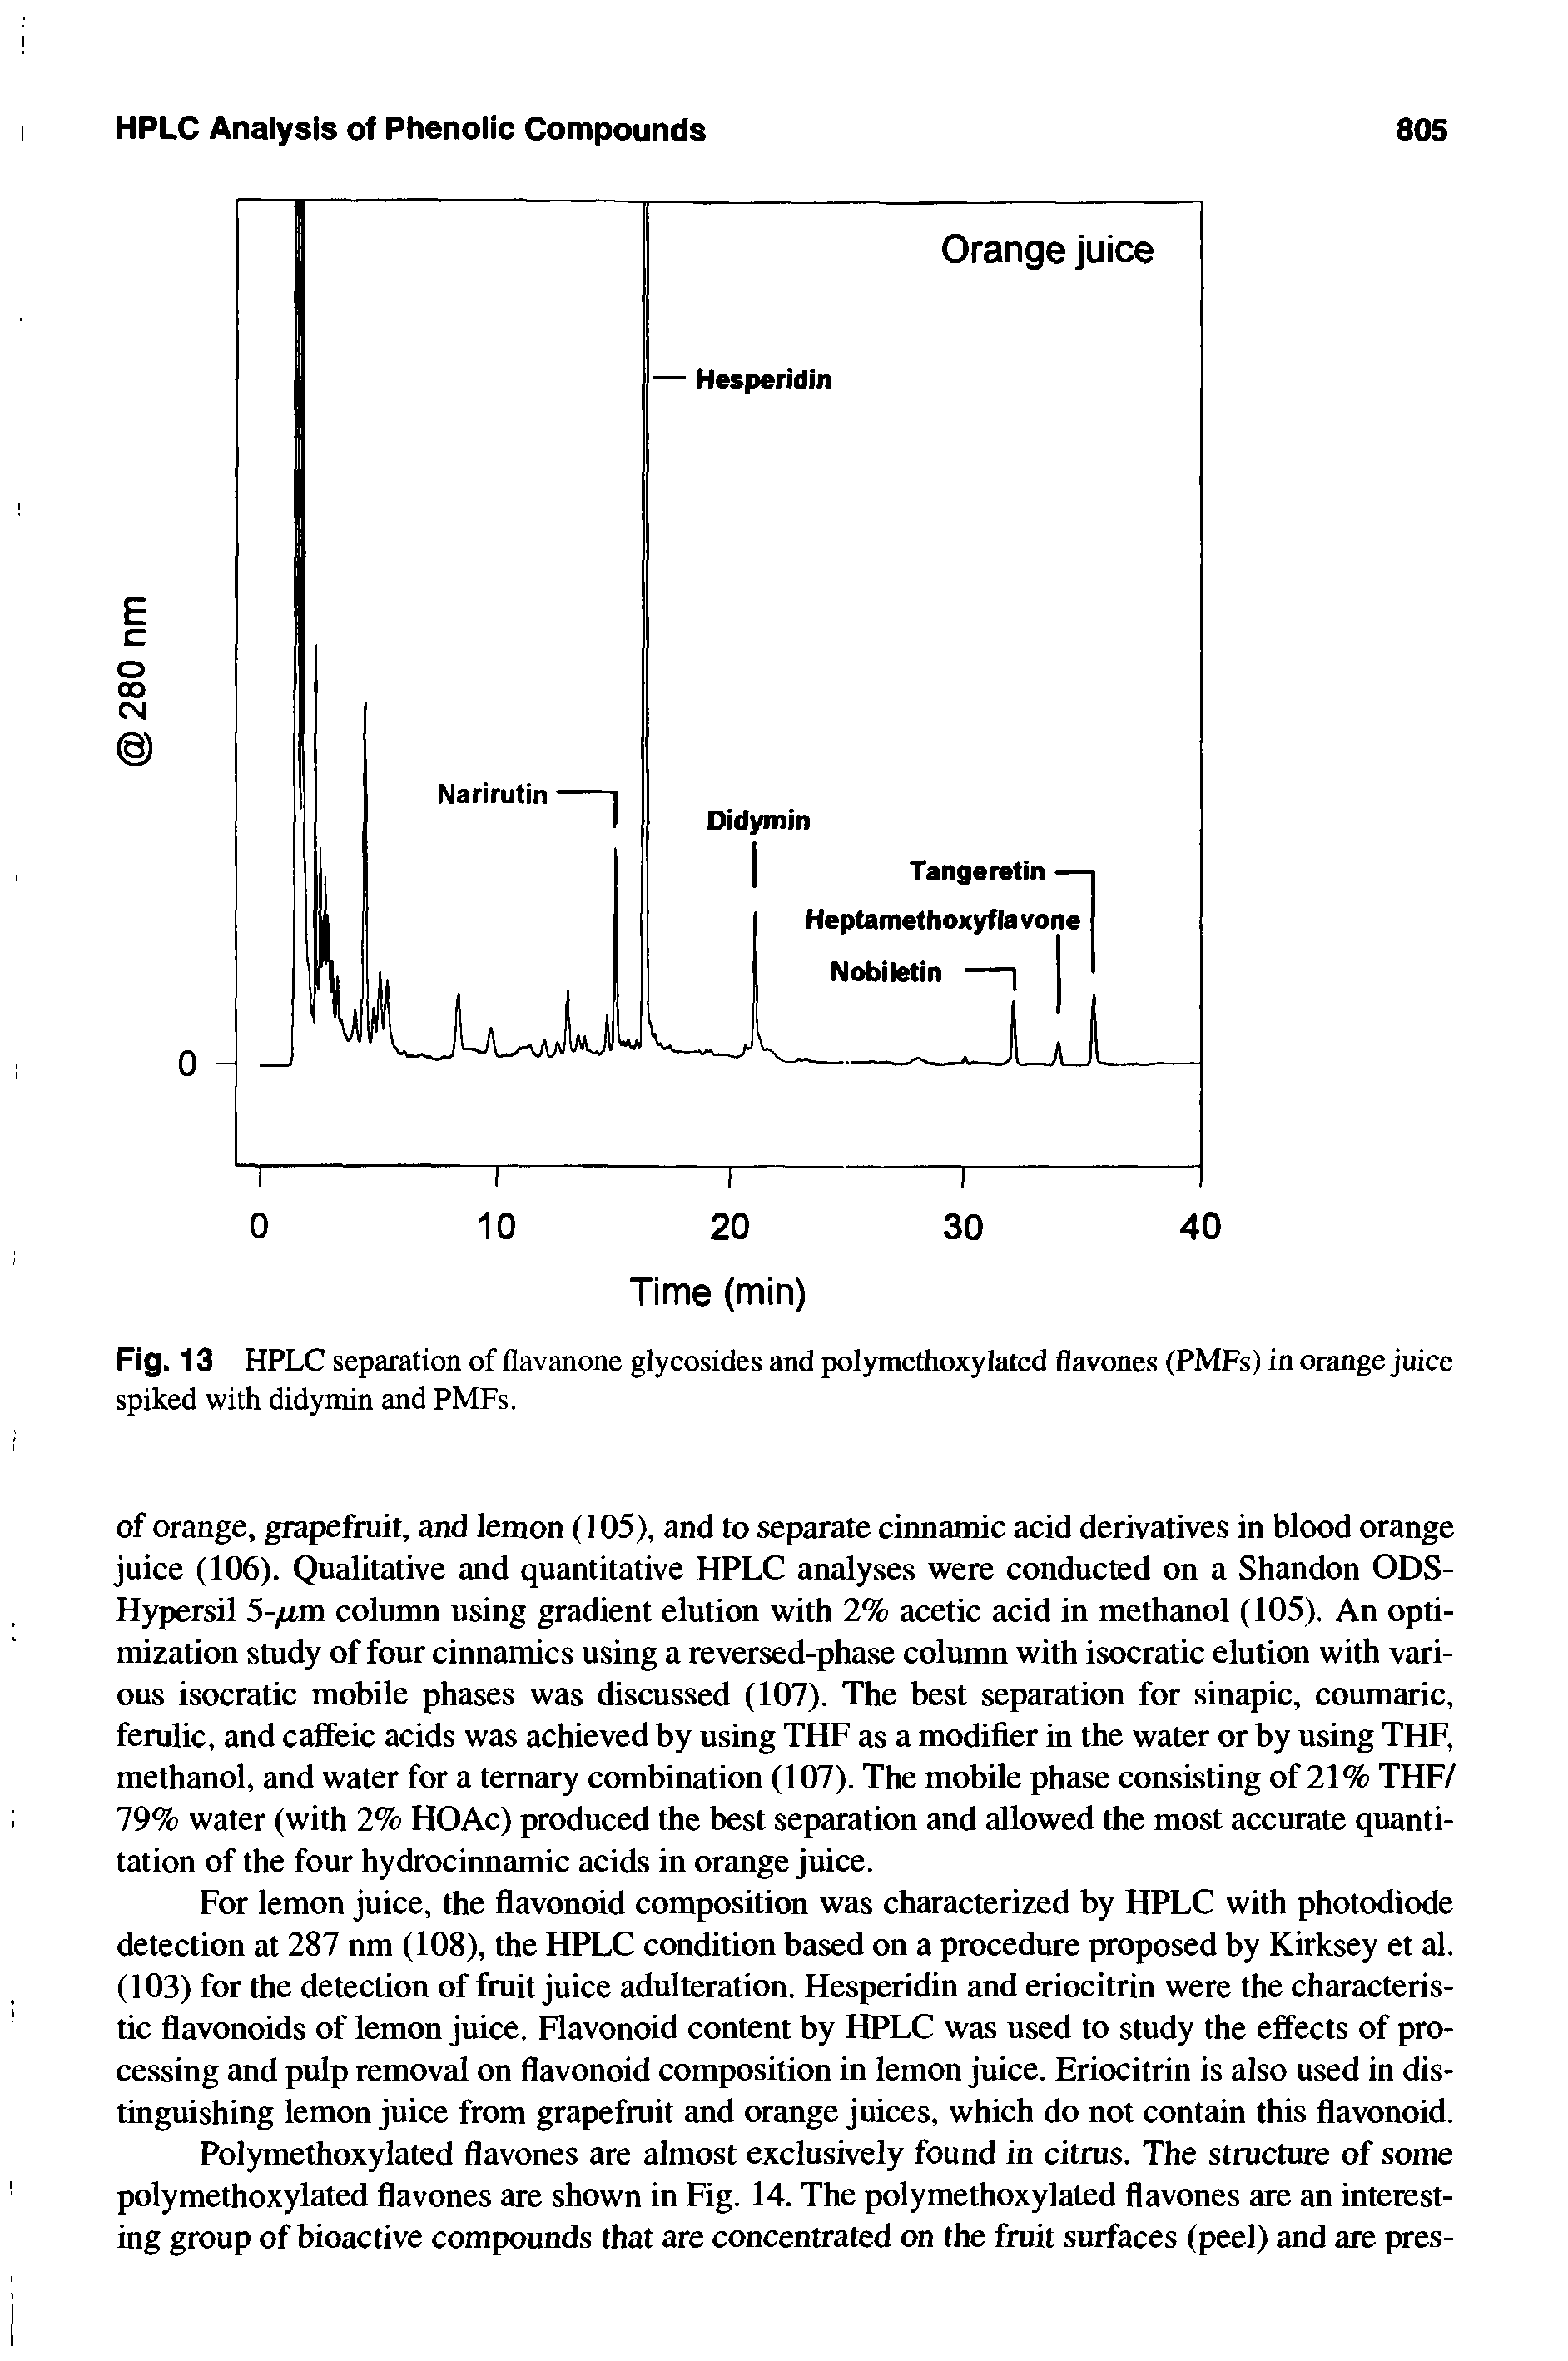 Fig. 13 HPLC separation of flavanone glycosides and polymethoxylated flavones (PMFs) in orange juice spiked with didymin and PMFs.